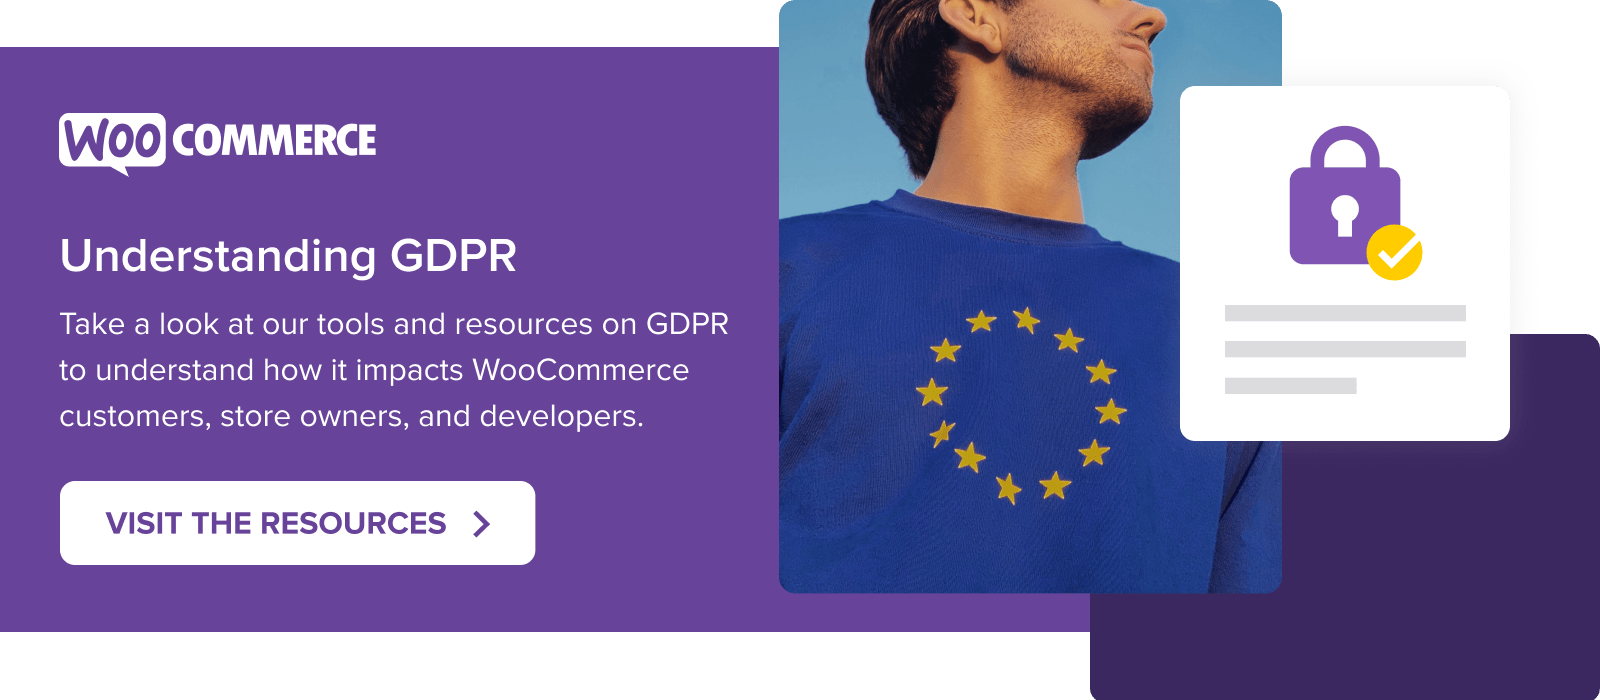 Take a look at our tools and resources on GDPR